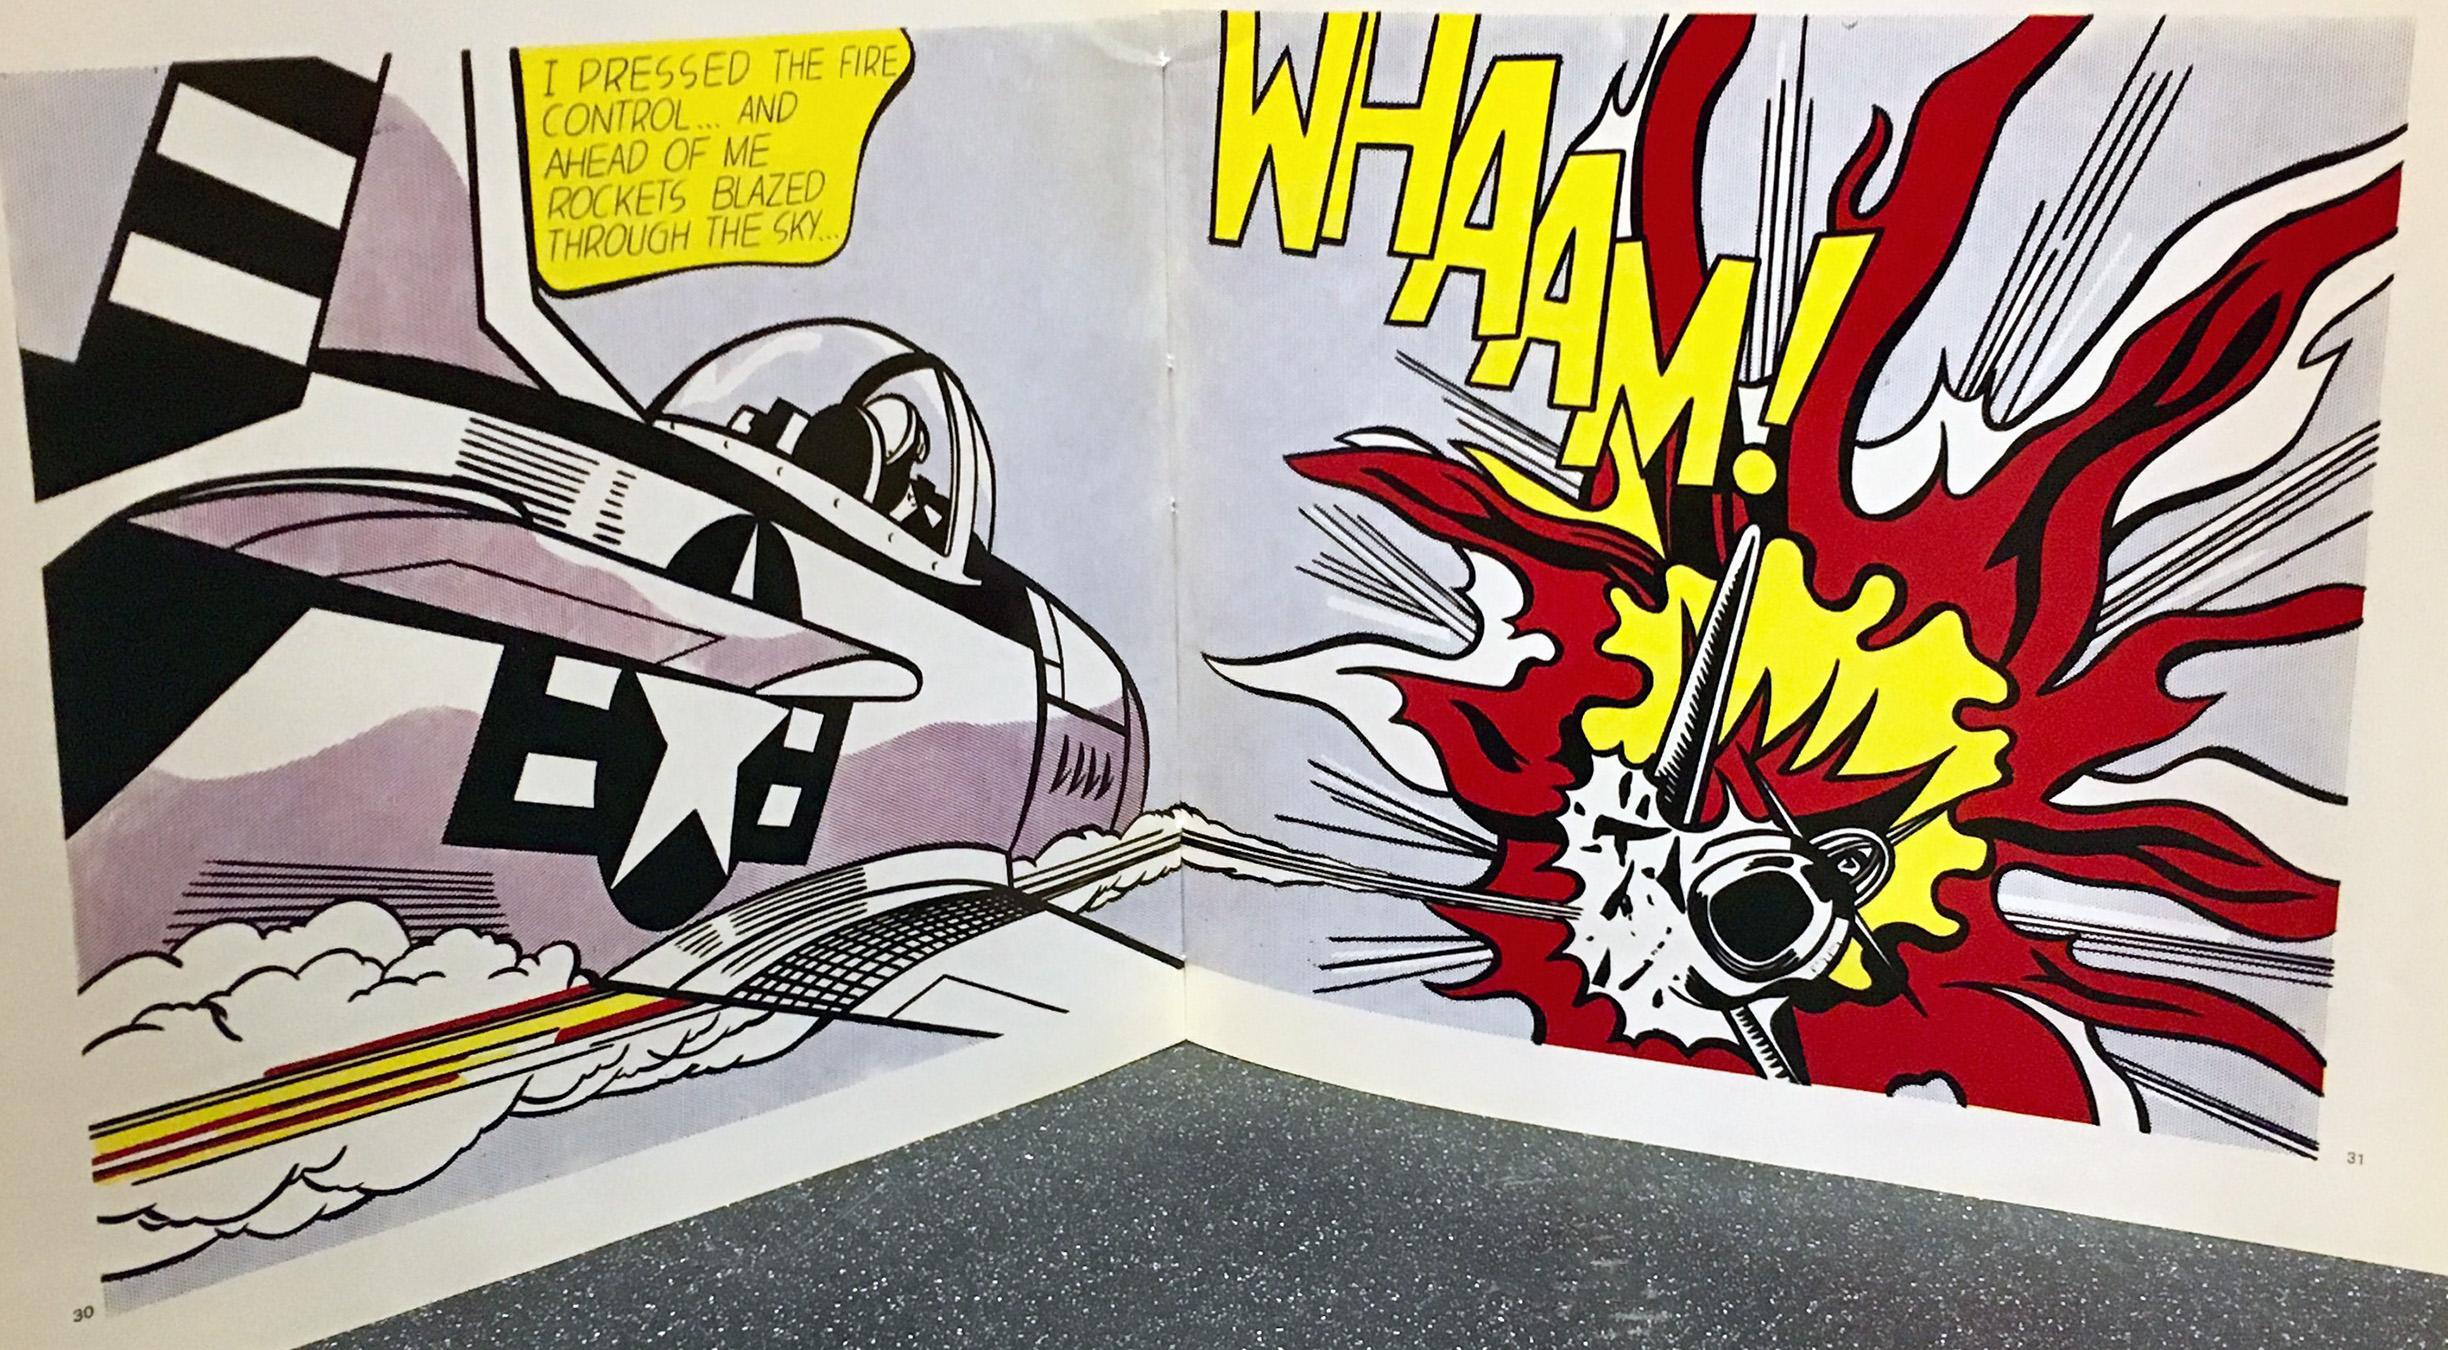 Roy Lichtenstein at The Tate Gallery, London, 1968
Vintage original exhibition catalog printed 1968
Cover: detail from Roy Lichtenstein 'Whaam!' (1963)
Includes note from the Director of Tate (see last photo in listing) 

Minor wear